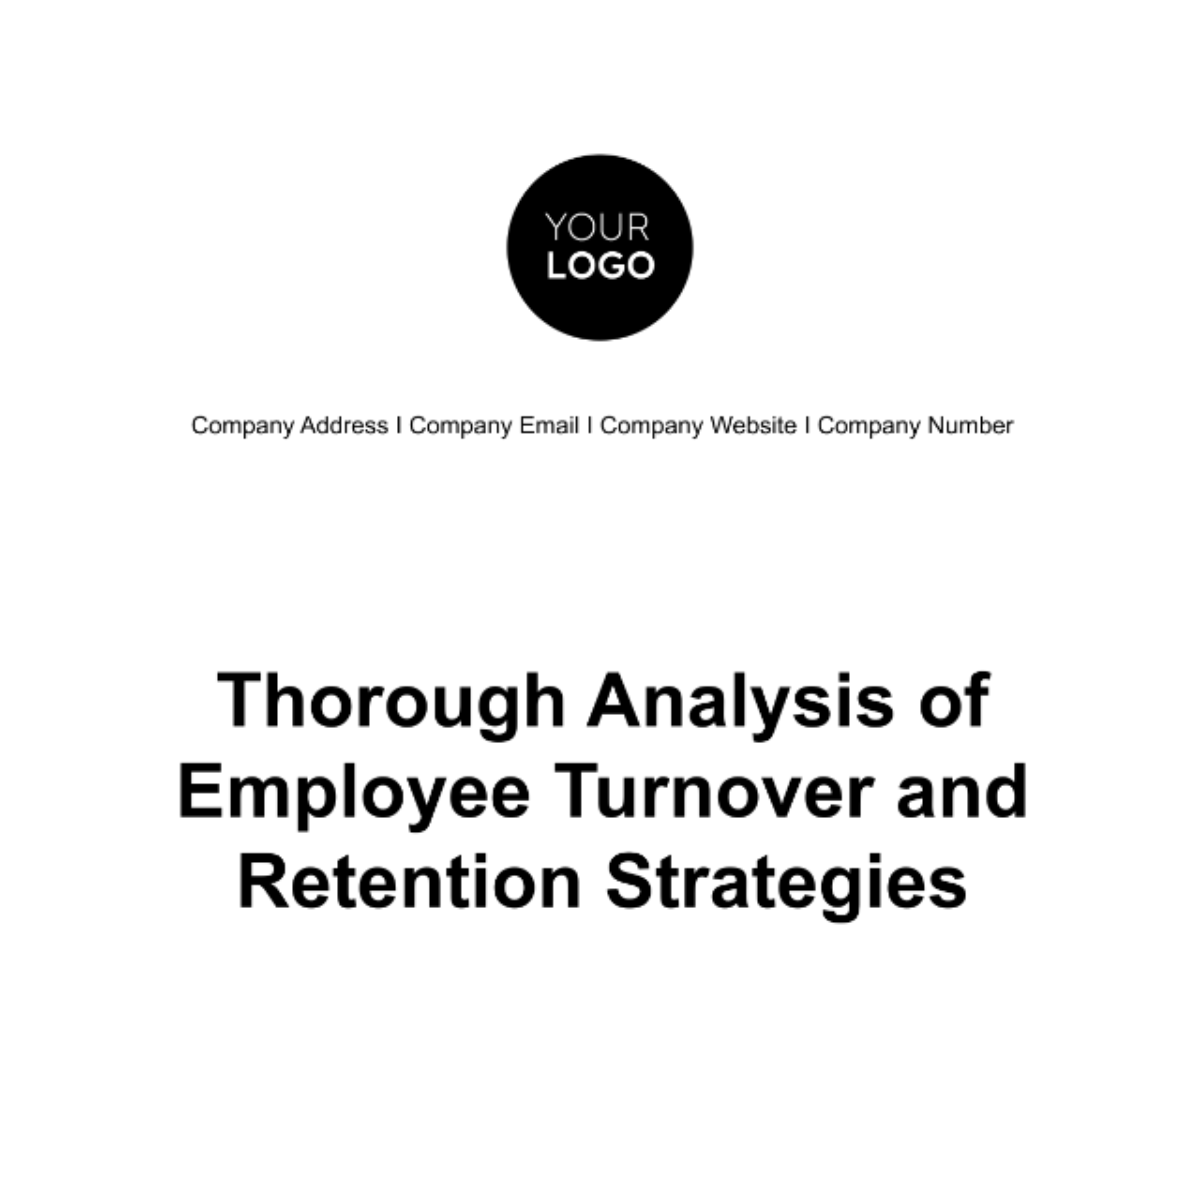 Free Thorough Analysis of Employee Turnover and Retention Strategies HR Template